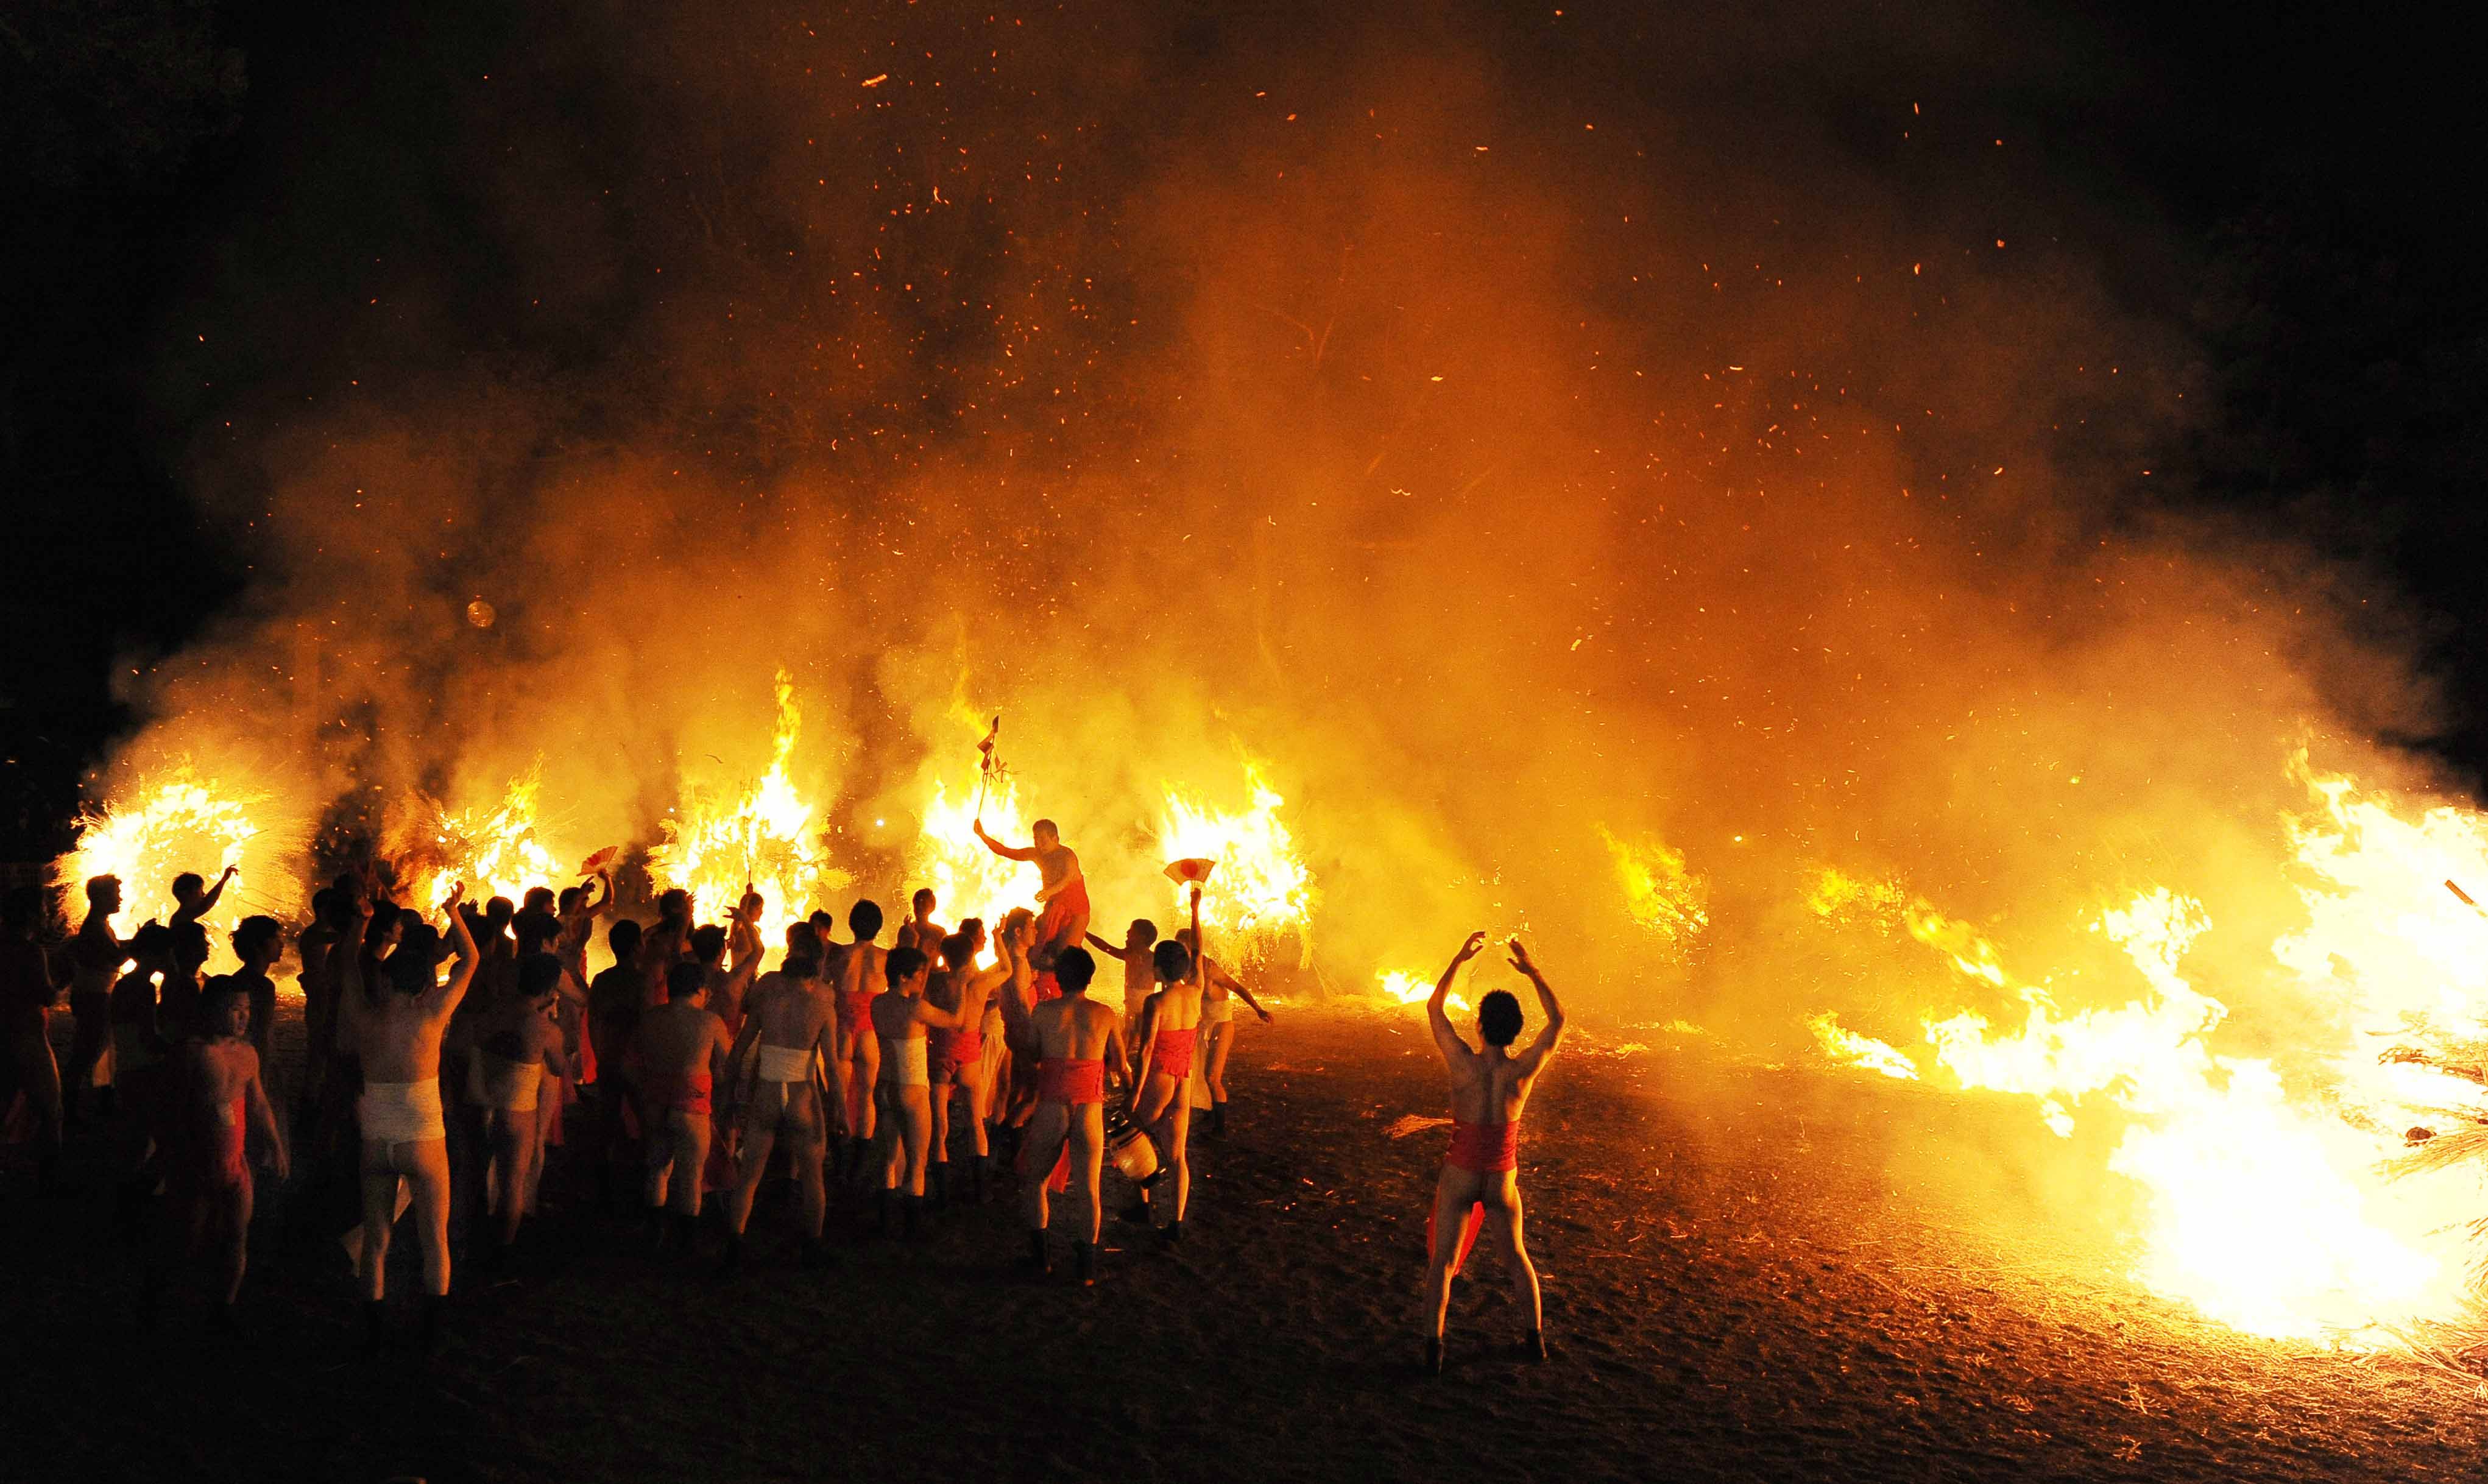 Torch bearers dancing wildly under a shower of sparks (in Moriyama-shi, Shiga Prefecture)